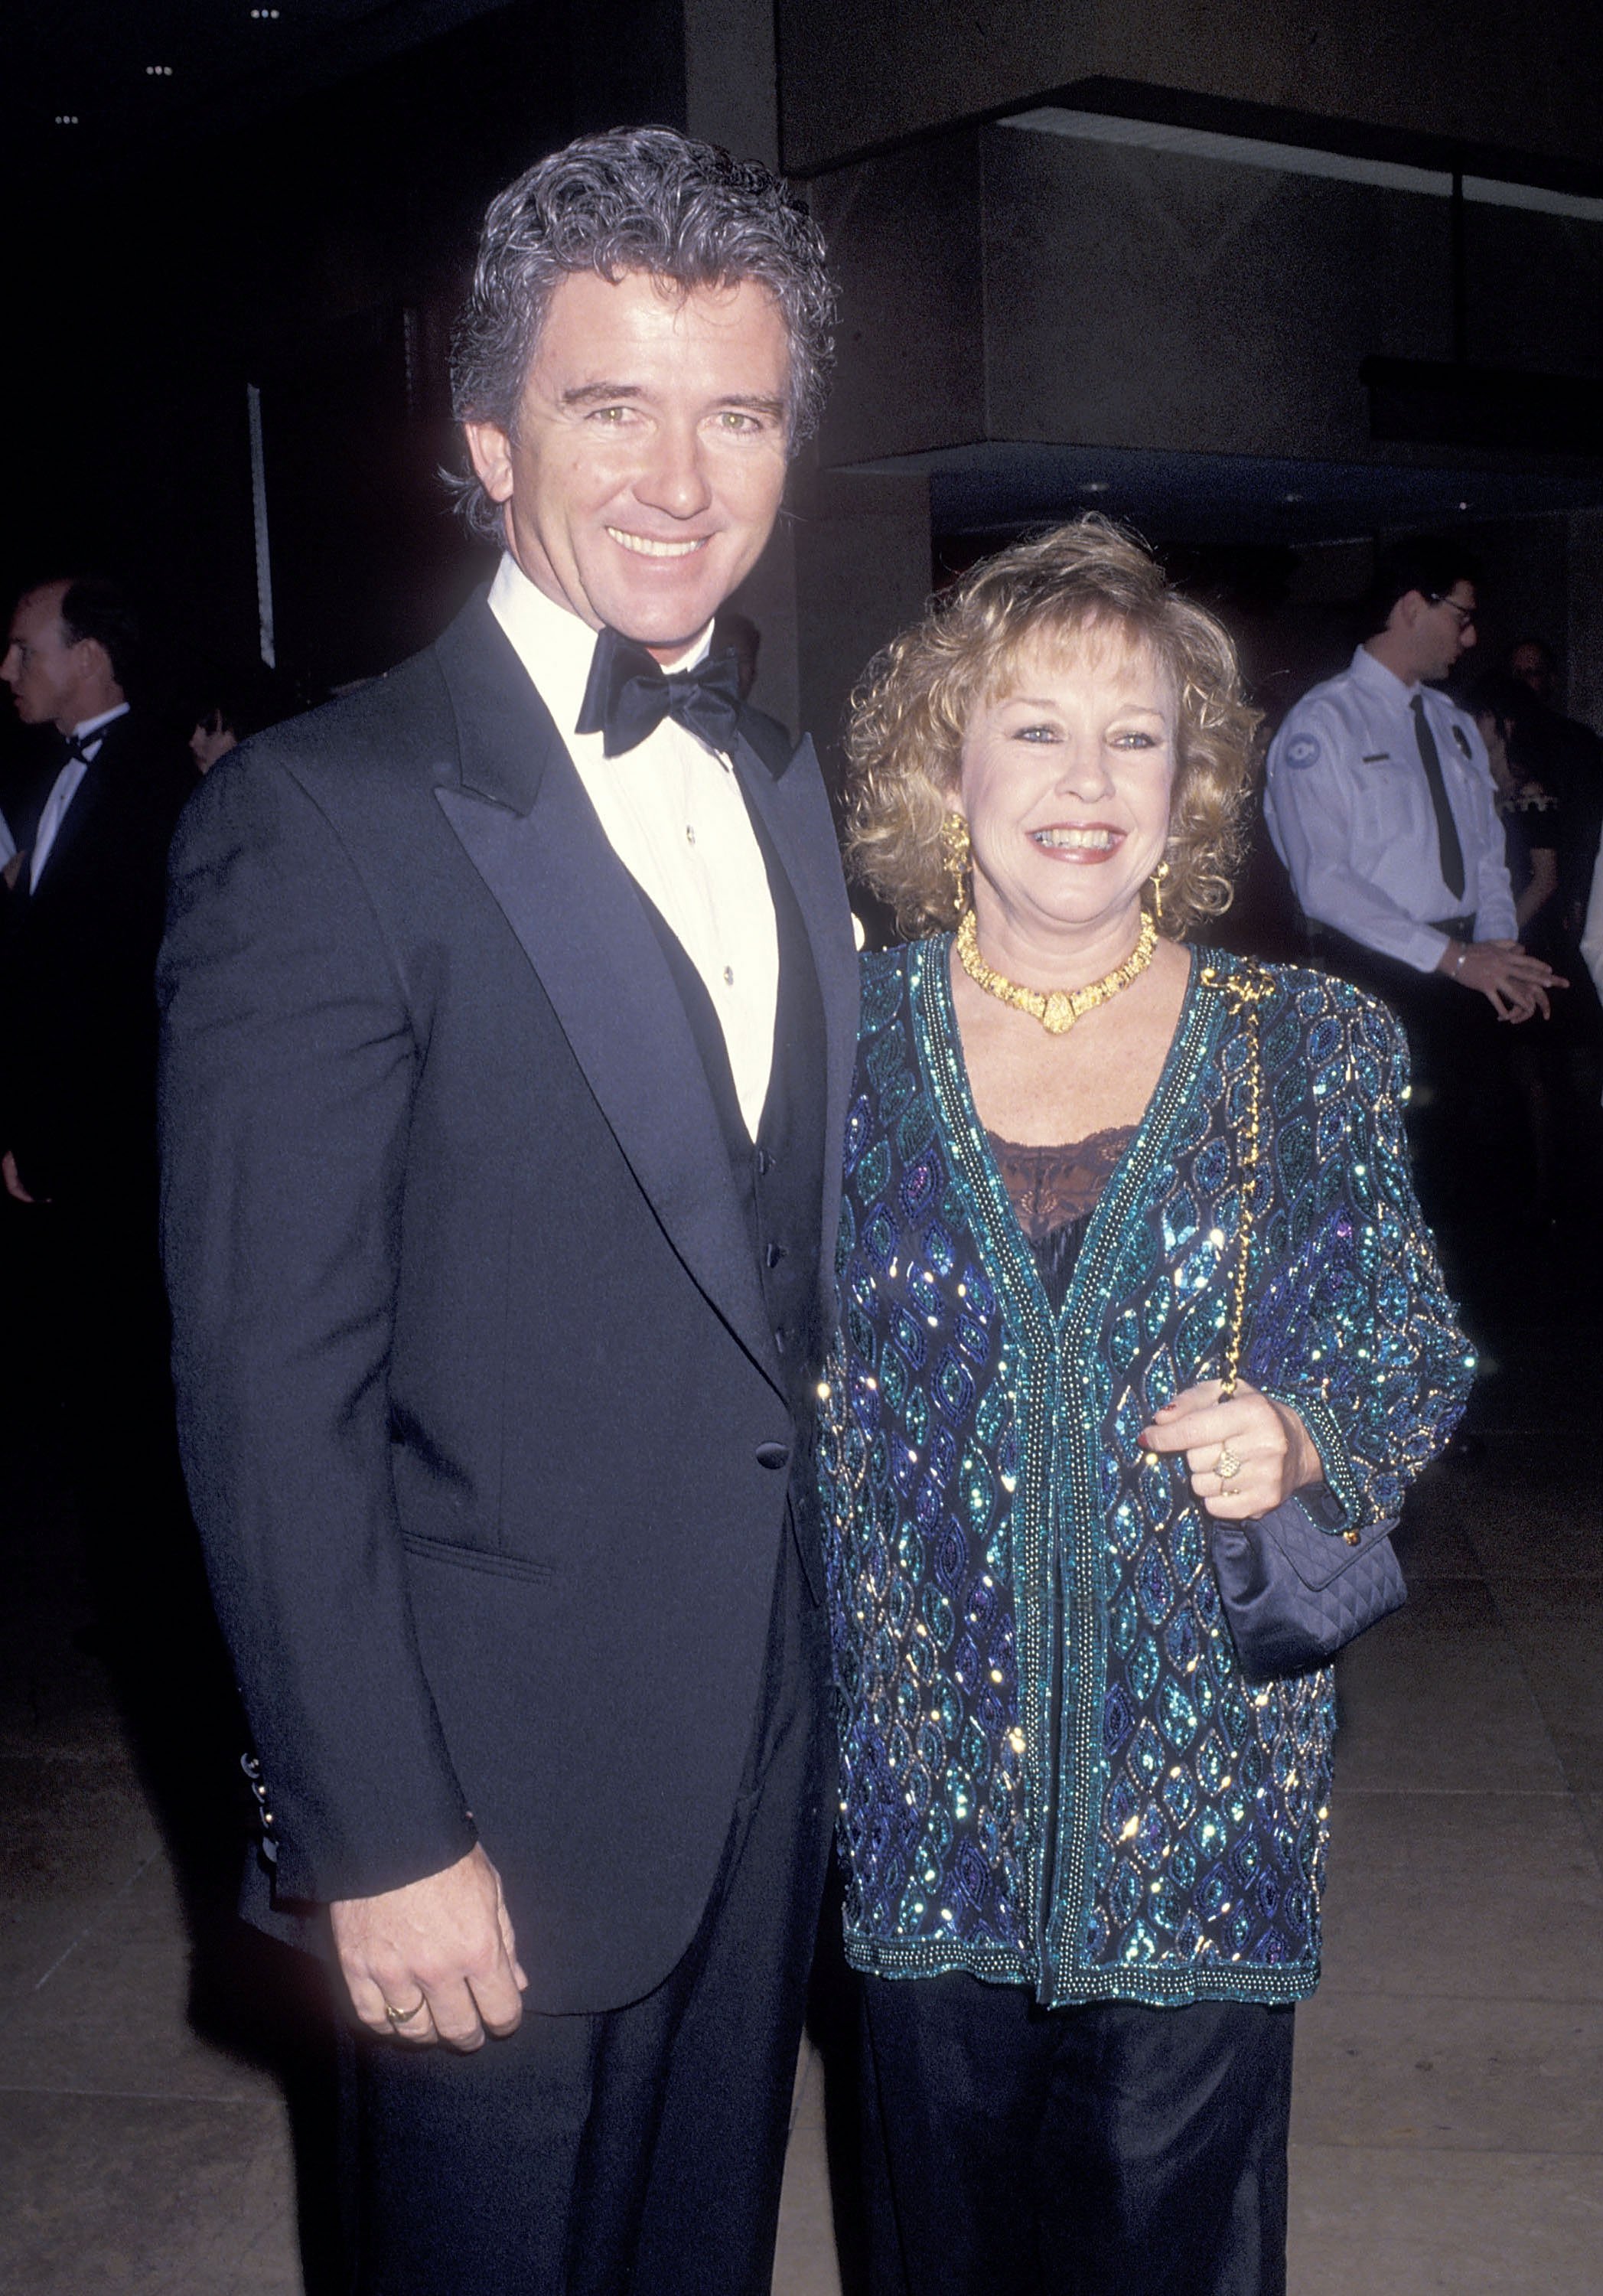 Patrick Duffy and wife Carlyn on December 2, 1992, at Beverly Hilton Hotel in Beverly Hills, California. | Source: Getty Images